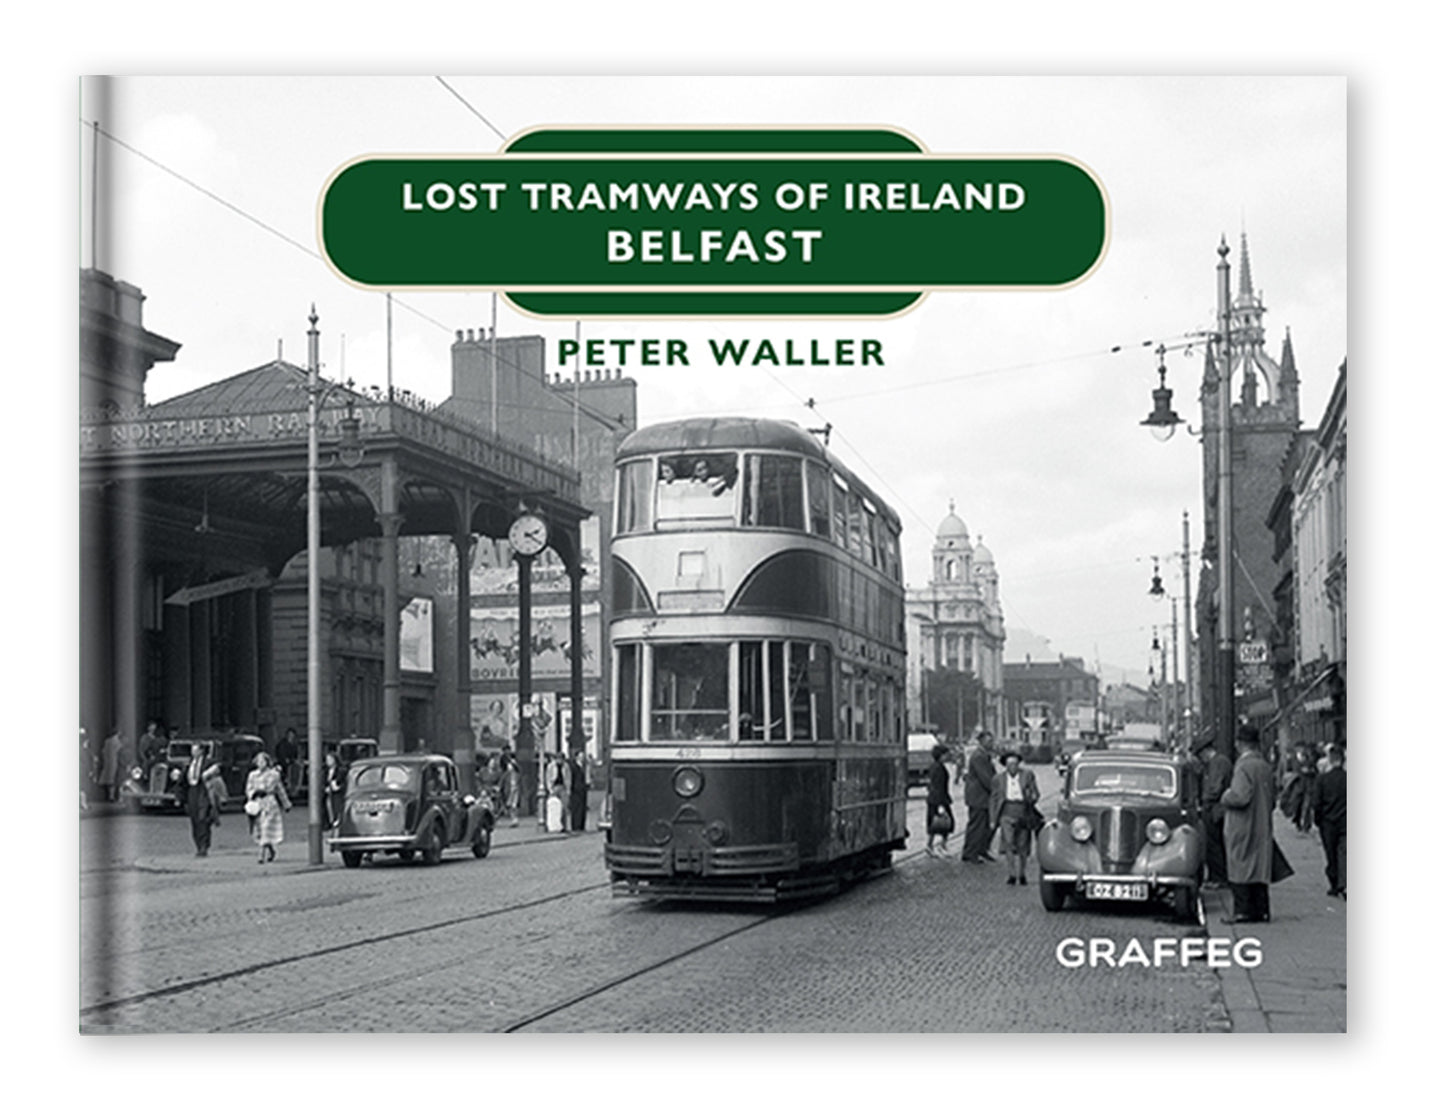 Lost Tramways of Ireland Belfast by Peter Waller published by Graffeg